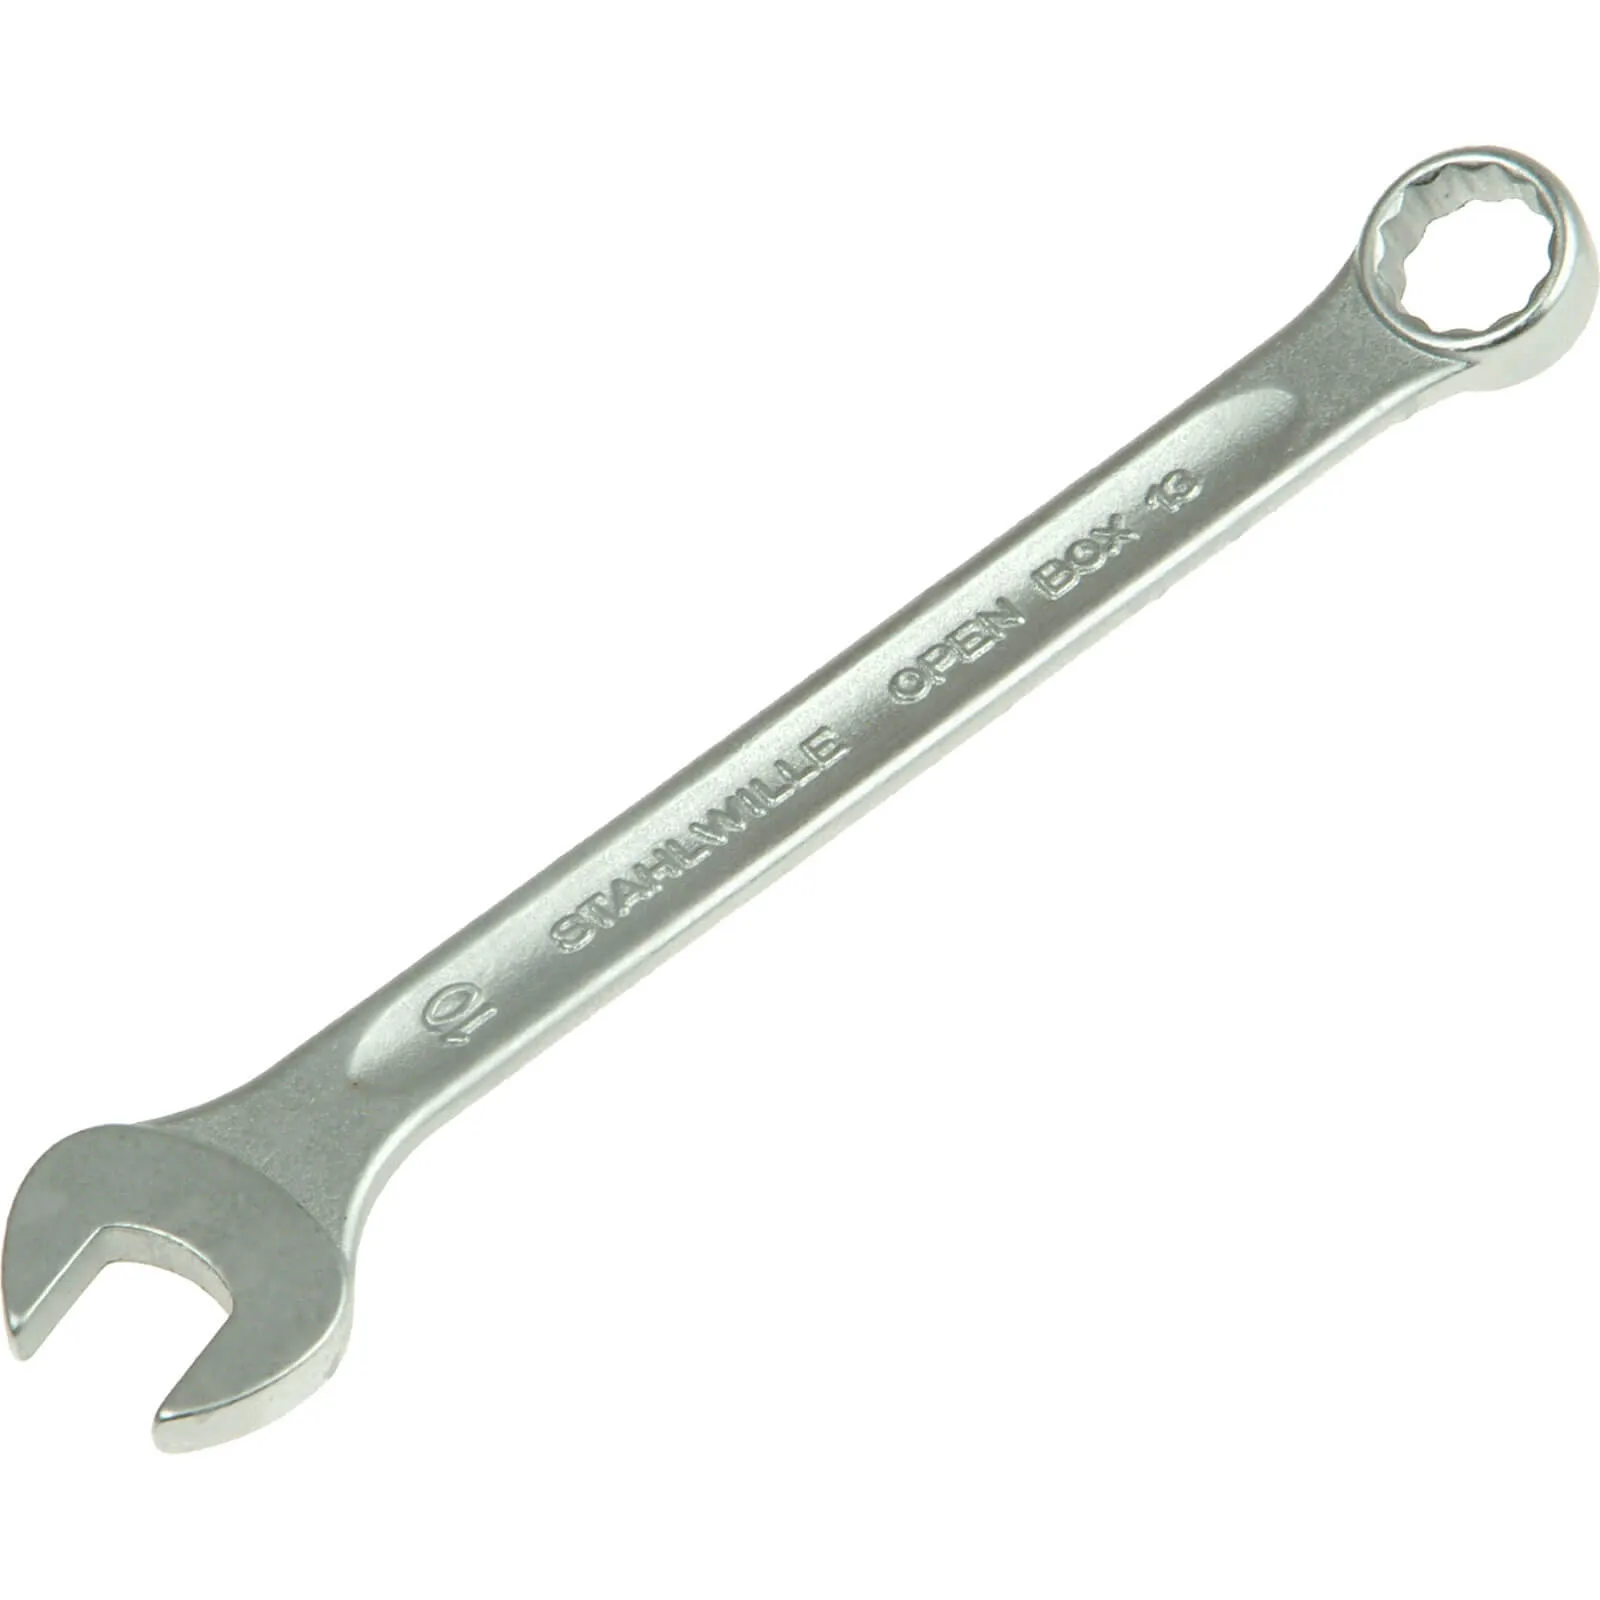 Stahlwille 13 Series Combination Spanner Metric - 13mm